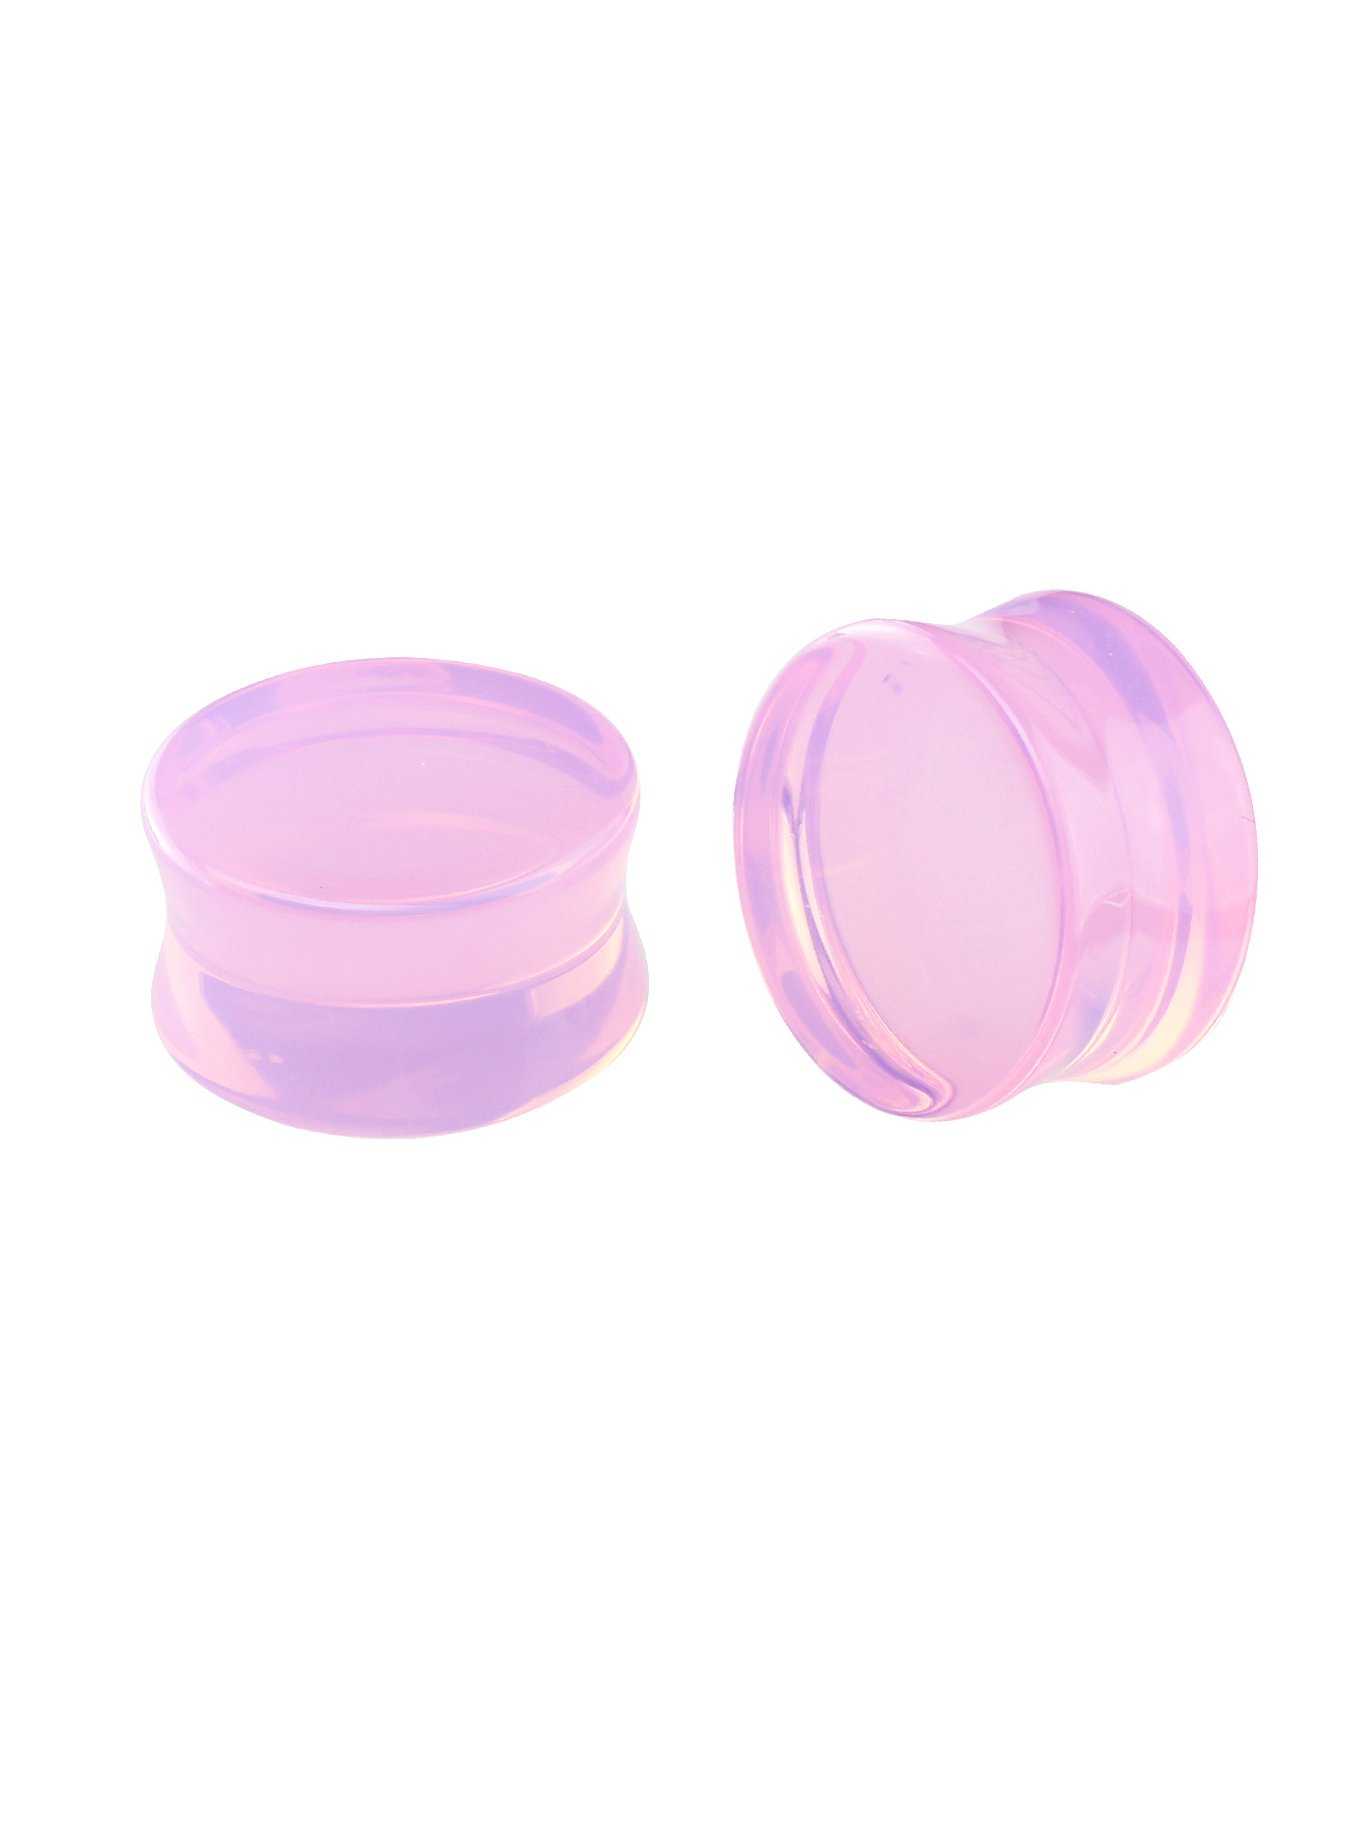 Mr. Lid Gamp Sports Shotshell Container - Pink